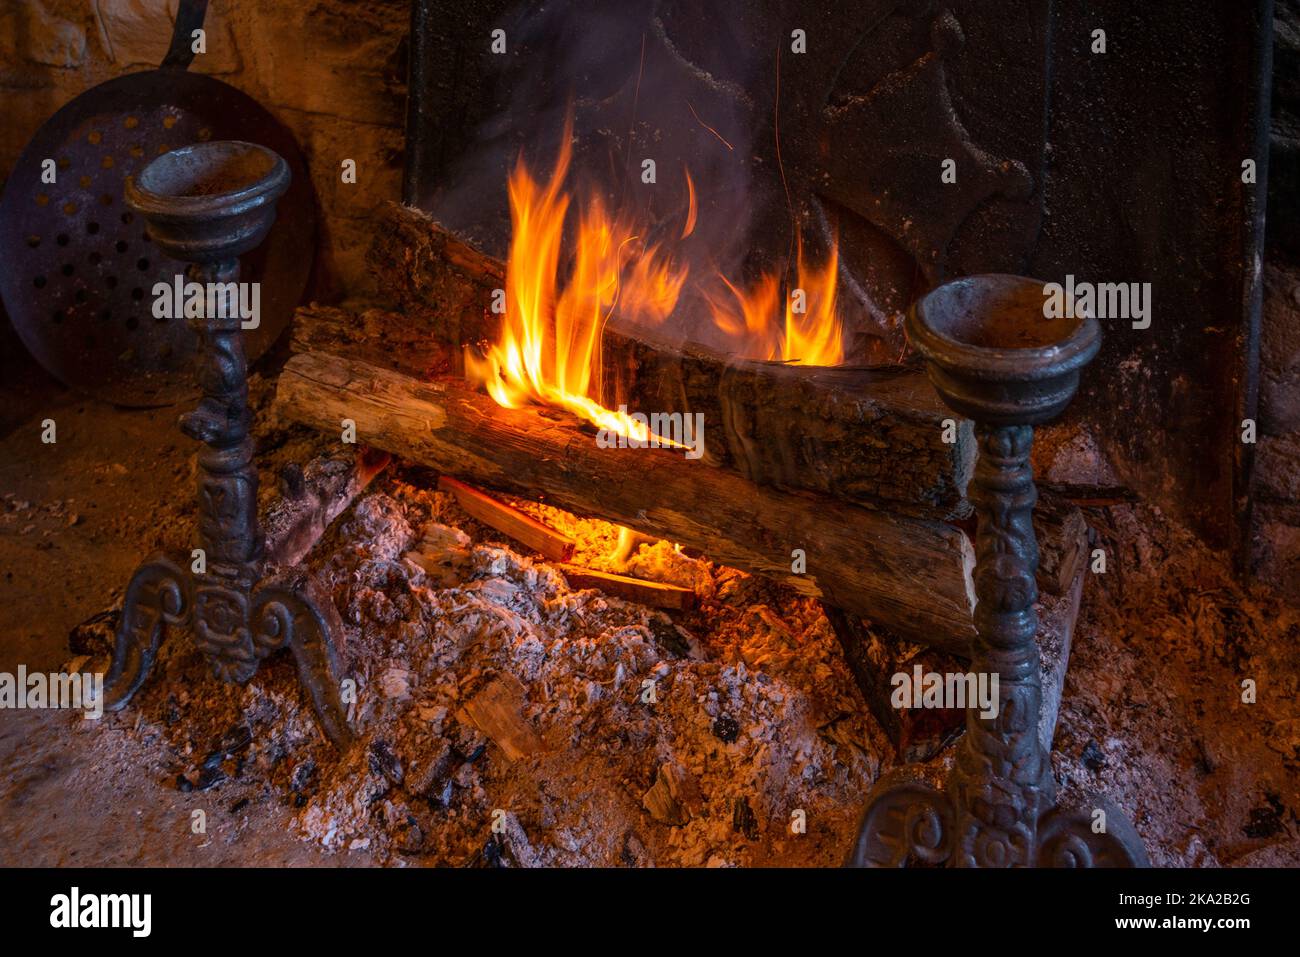 A close up of wood logs burning on a typical hearth fire, with metal fireside ornaments. Stock Photo